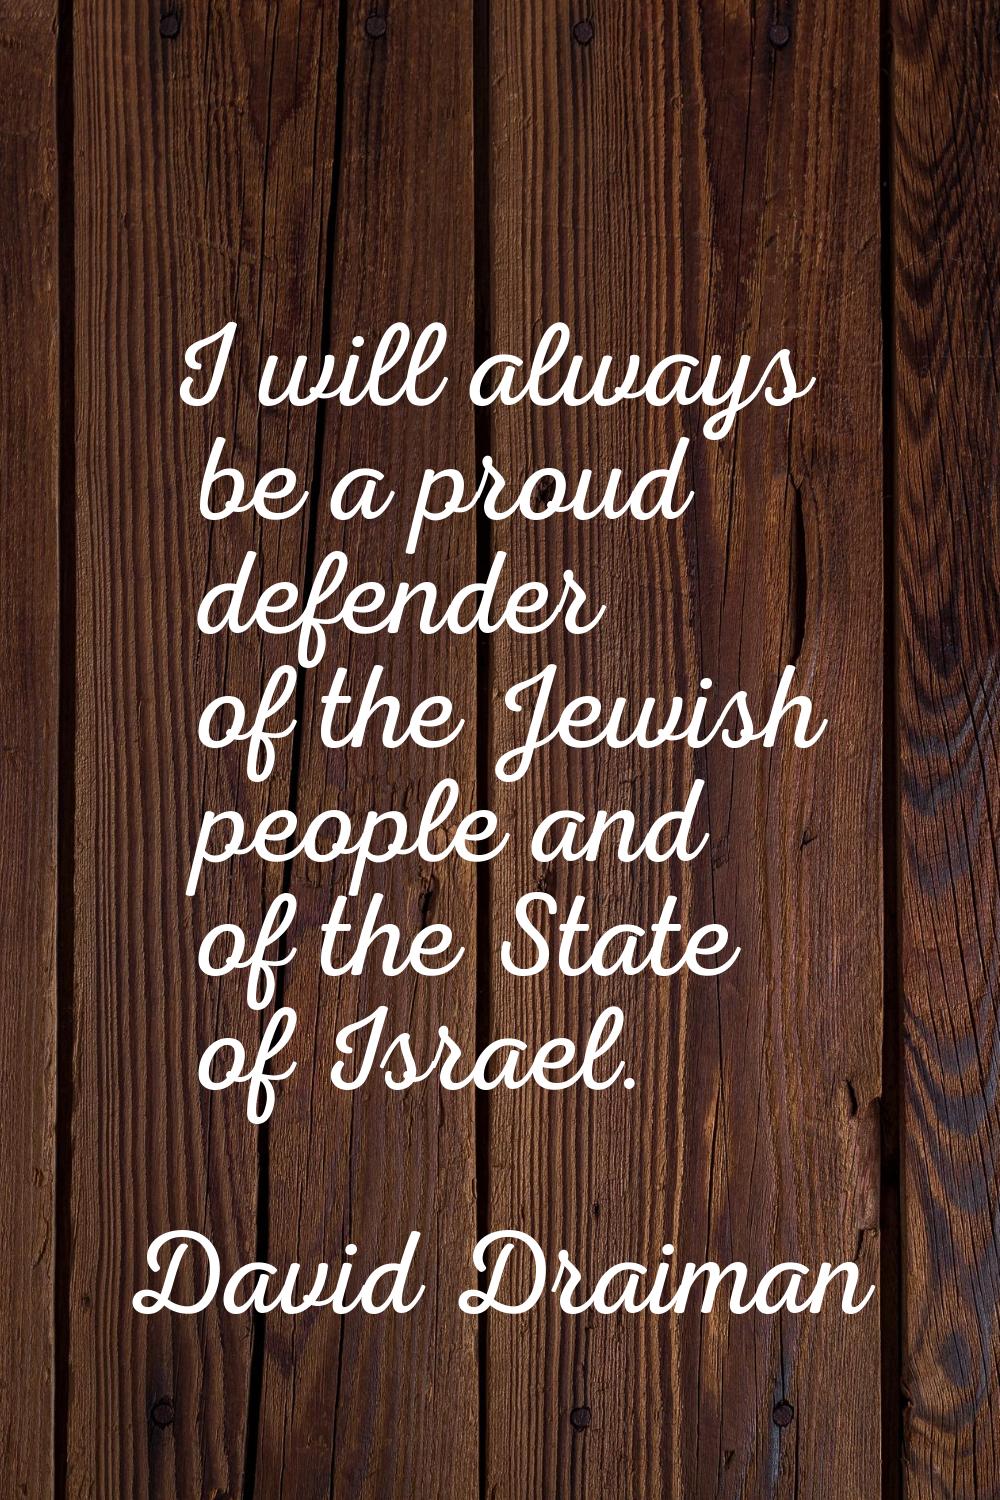 I will always be a proud defender of the Jewish people and of the State of Israel.